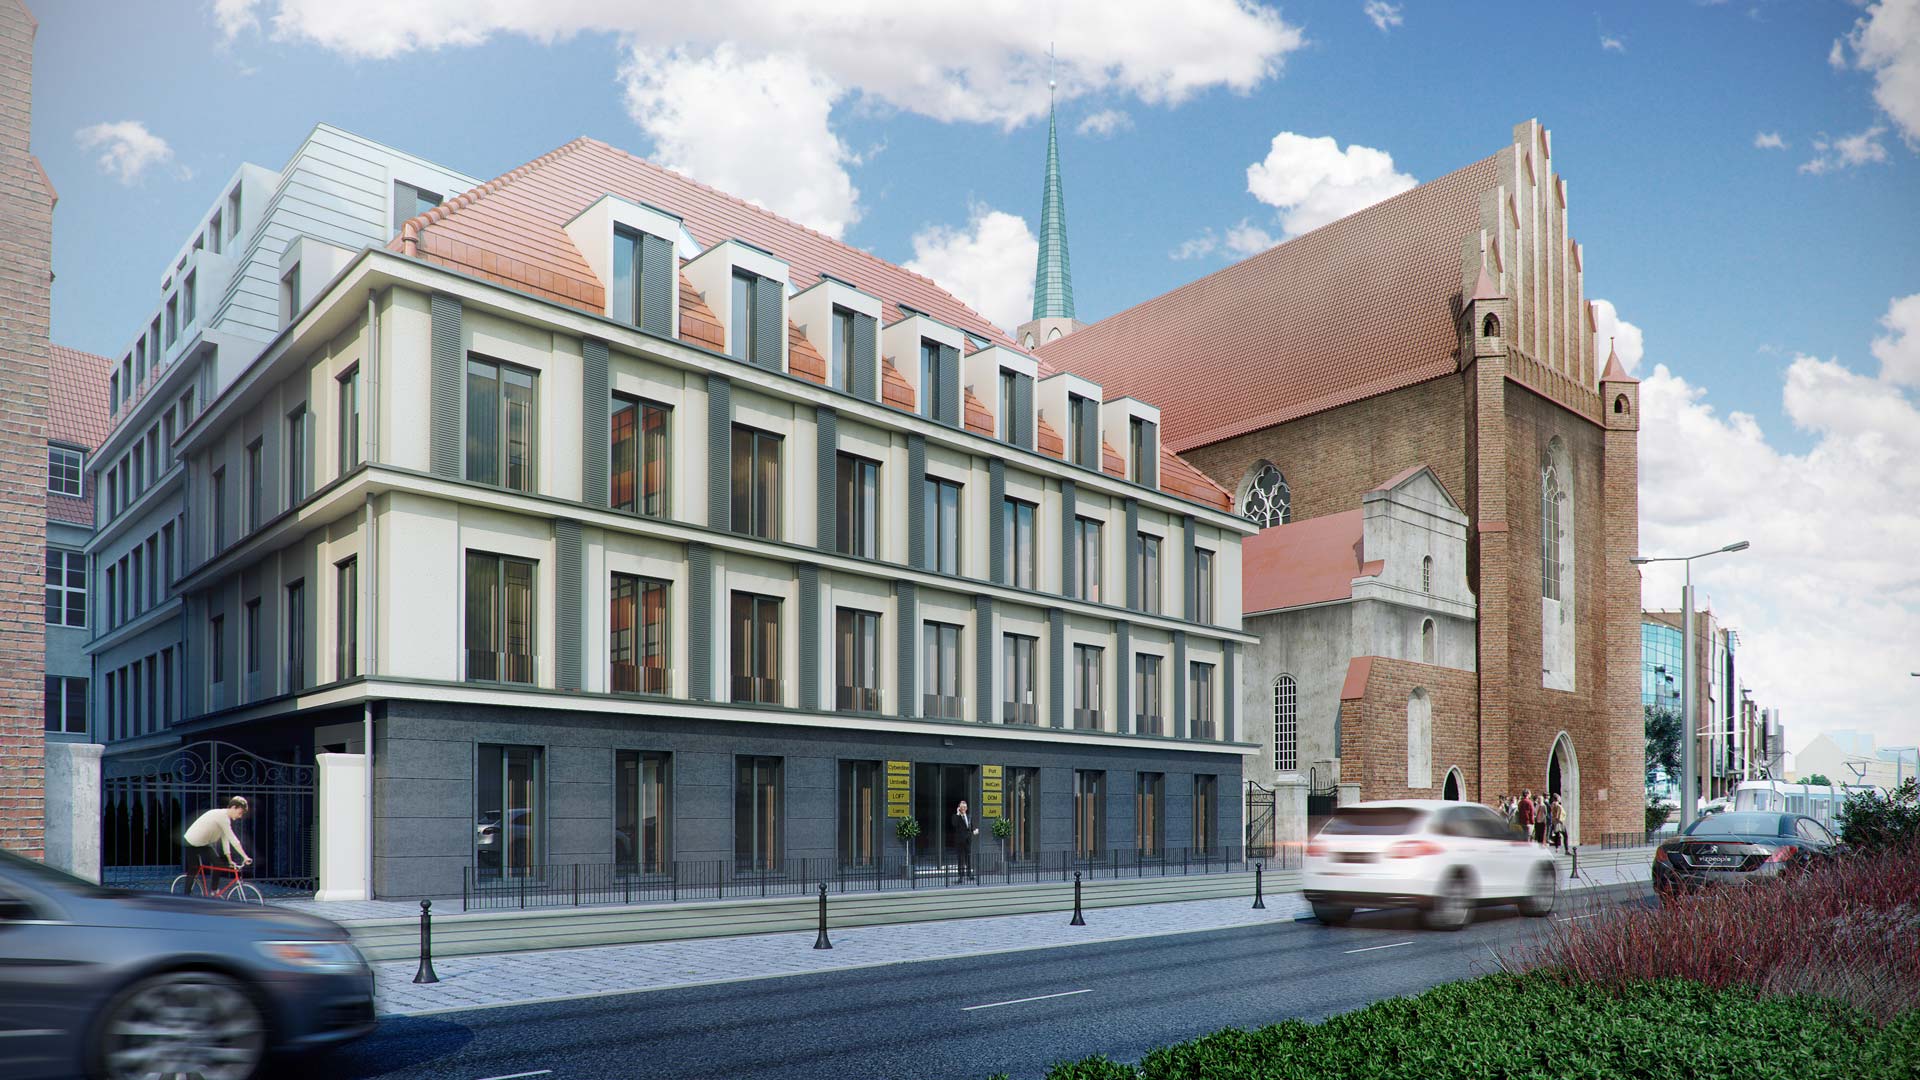 RECONSTRUCTION OF OLD BUILDING IN WROCLAW